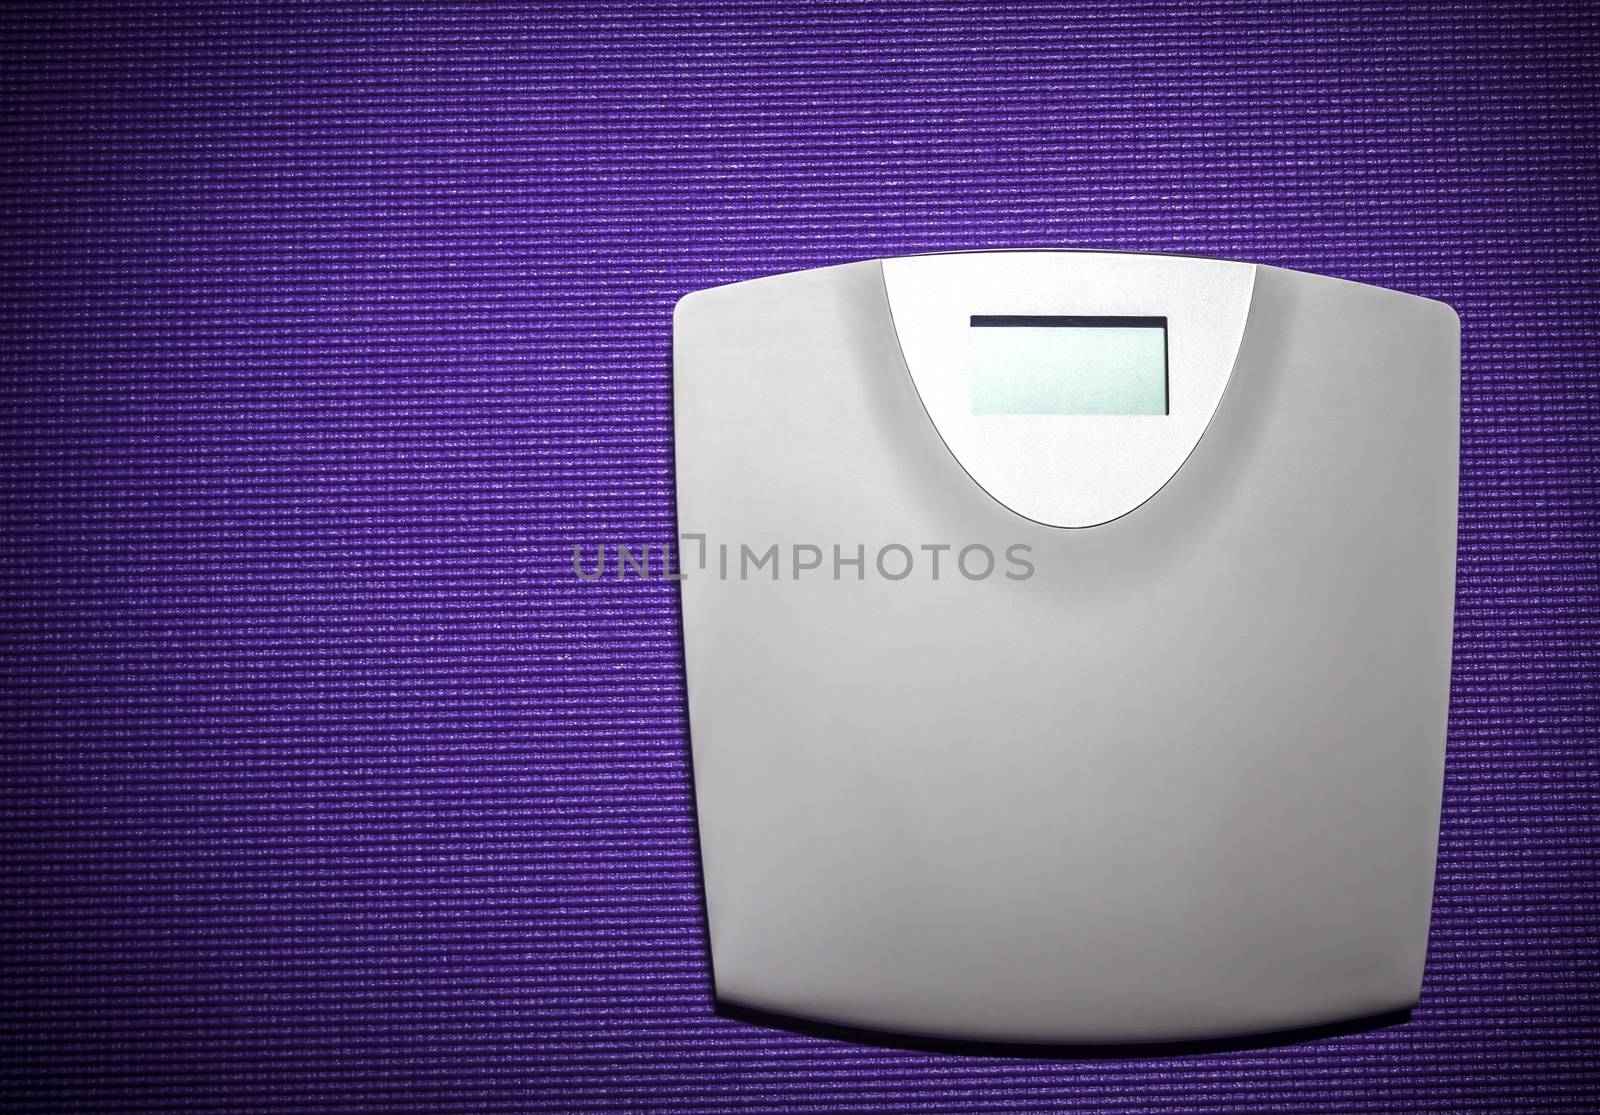 Digital weight scale on purple carpet background